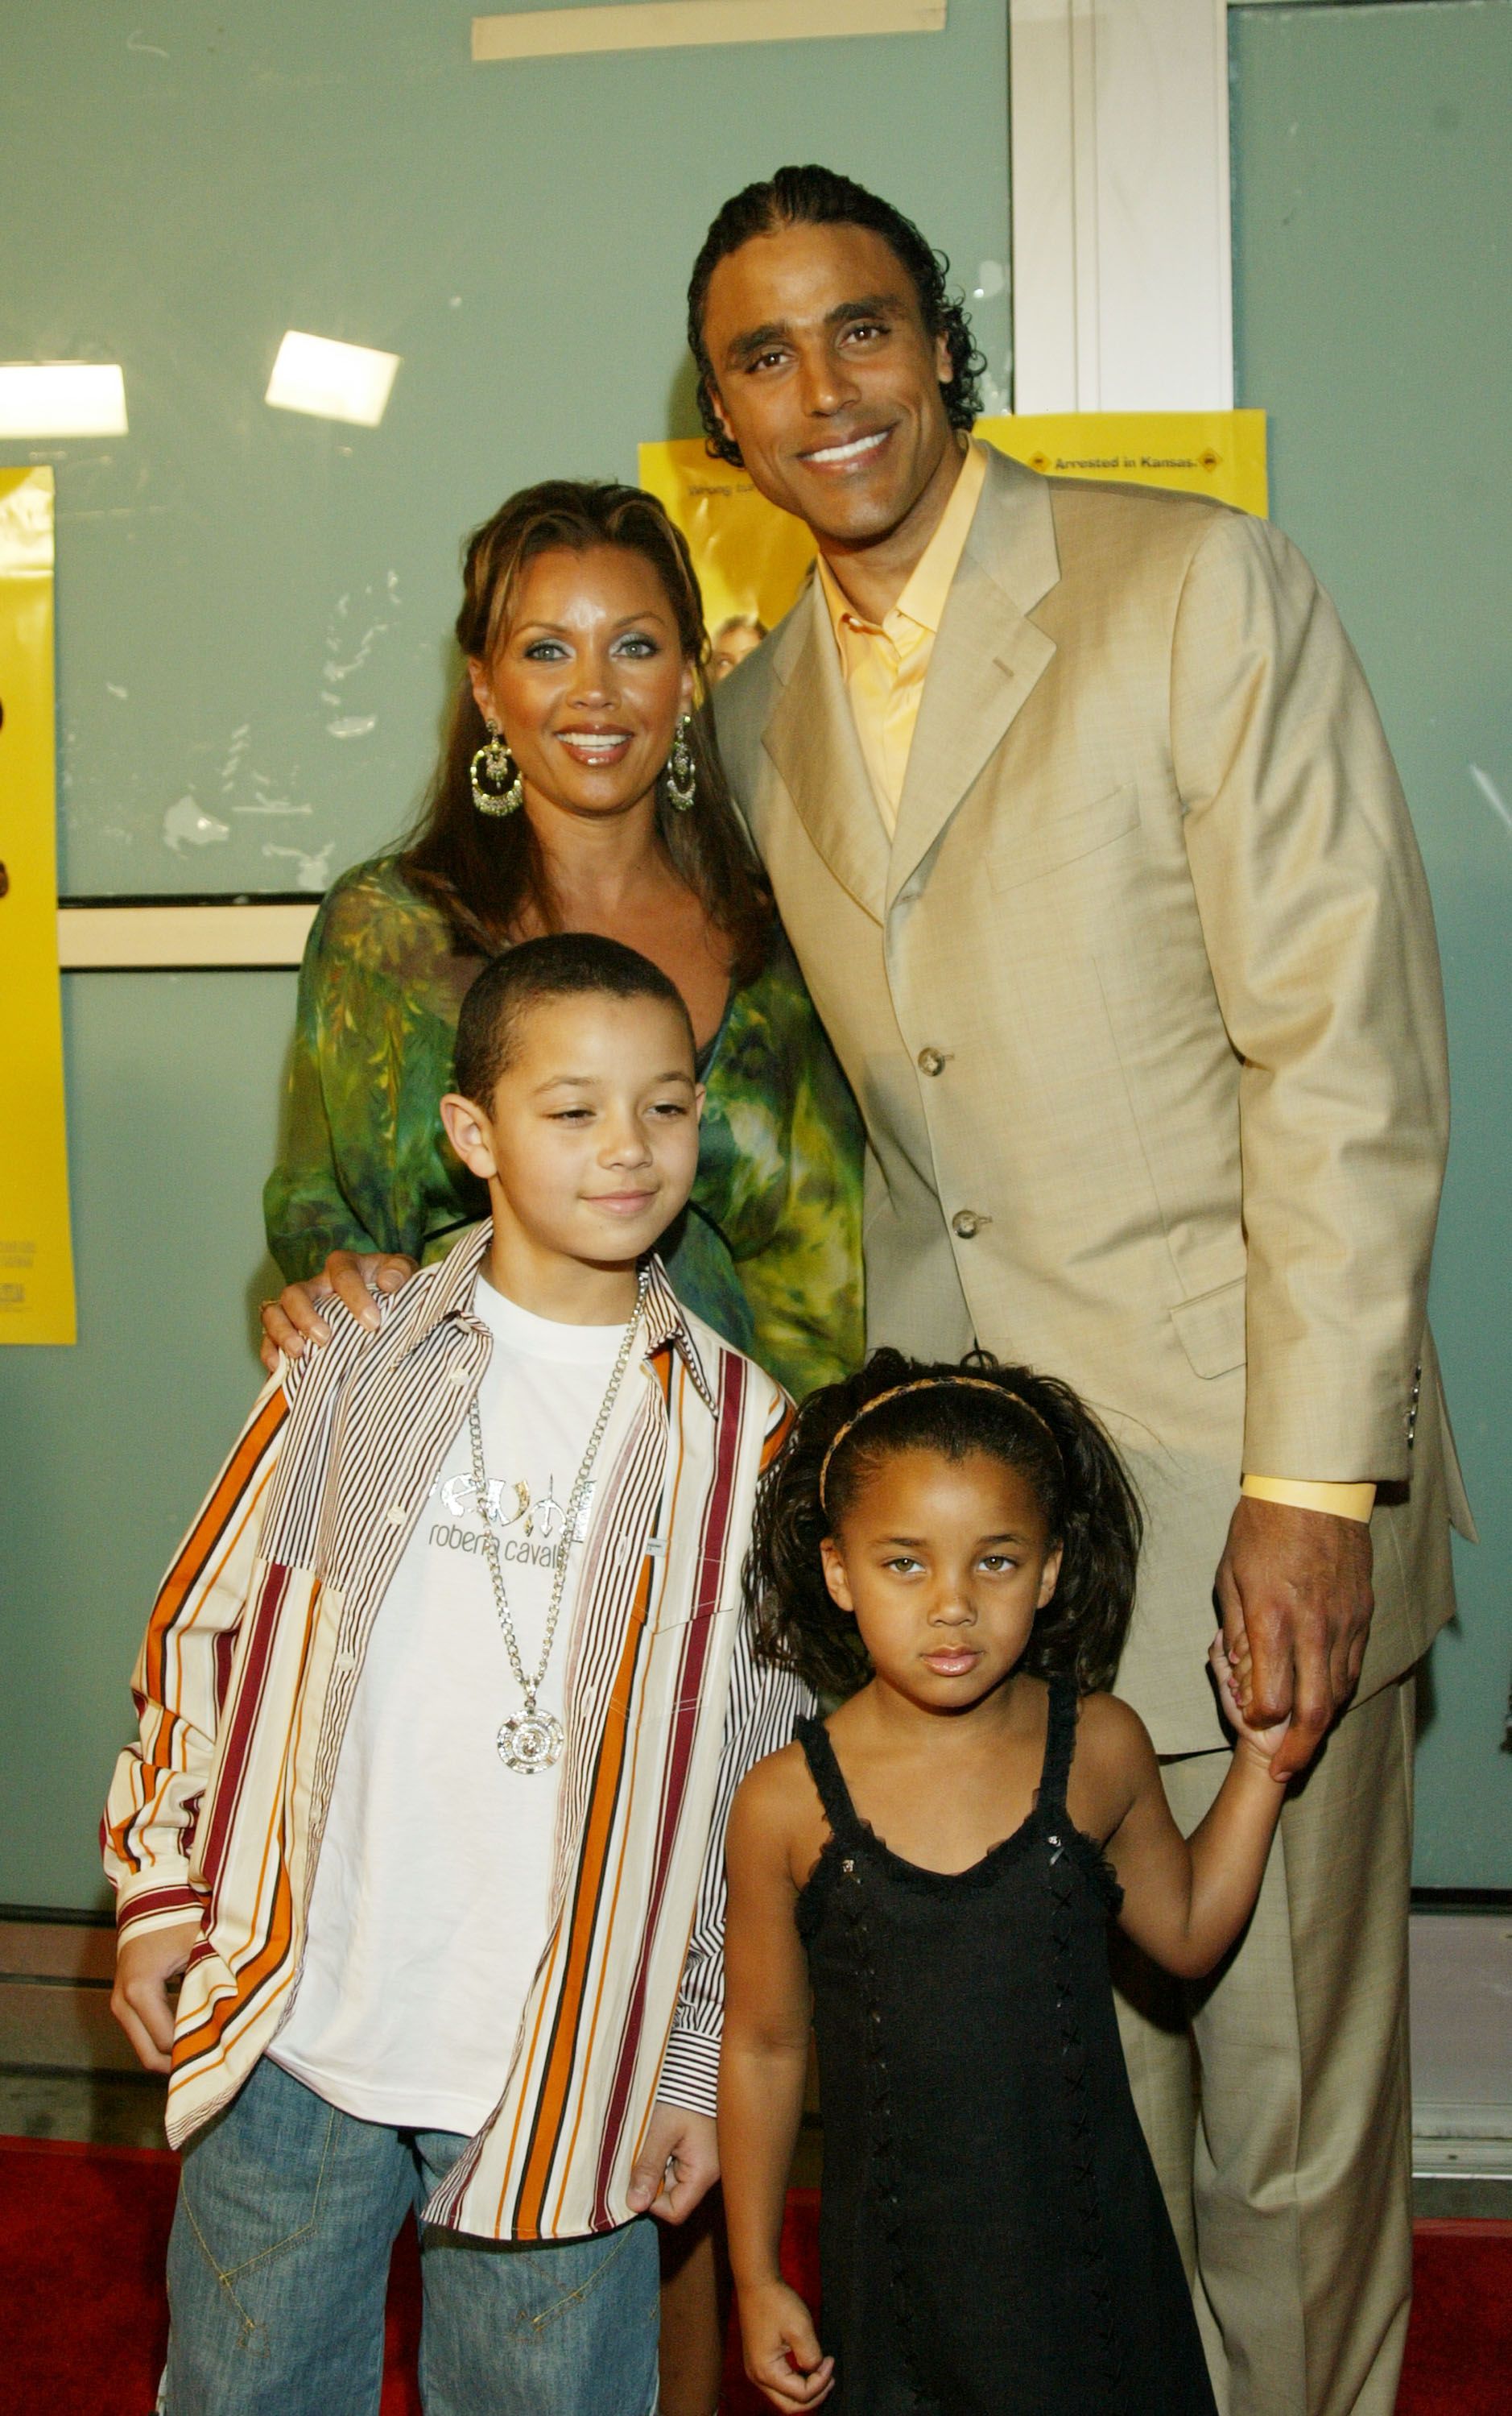  Vanessa Williams, Rick Fox and theri children at the premier of "Johnson Family Vacation"in 2004 | Source: Getty Images